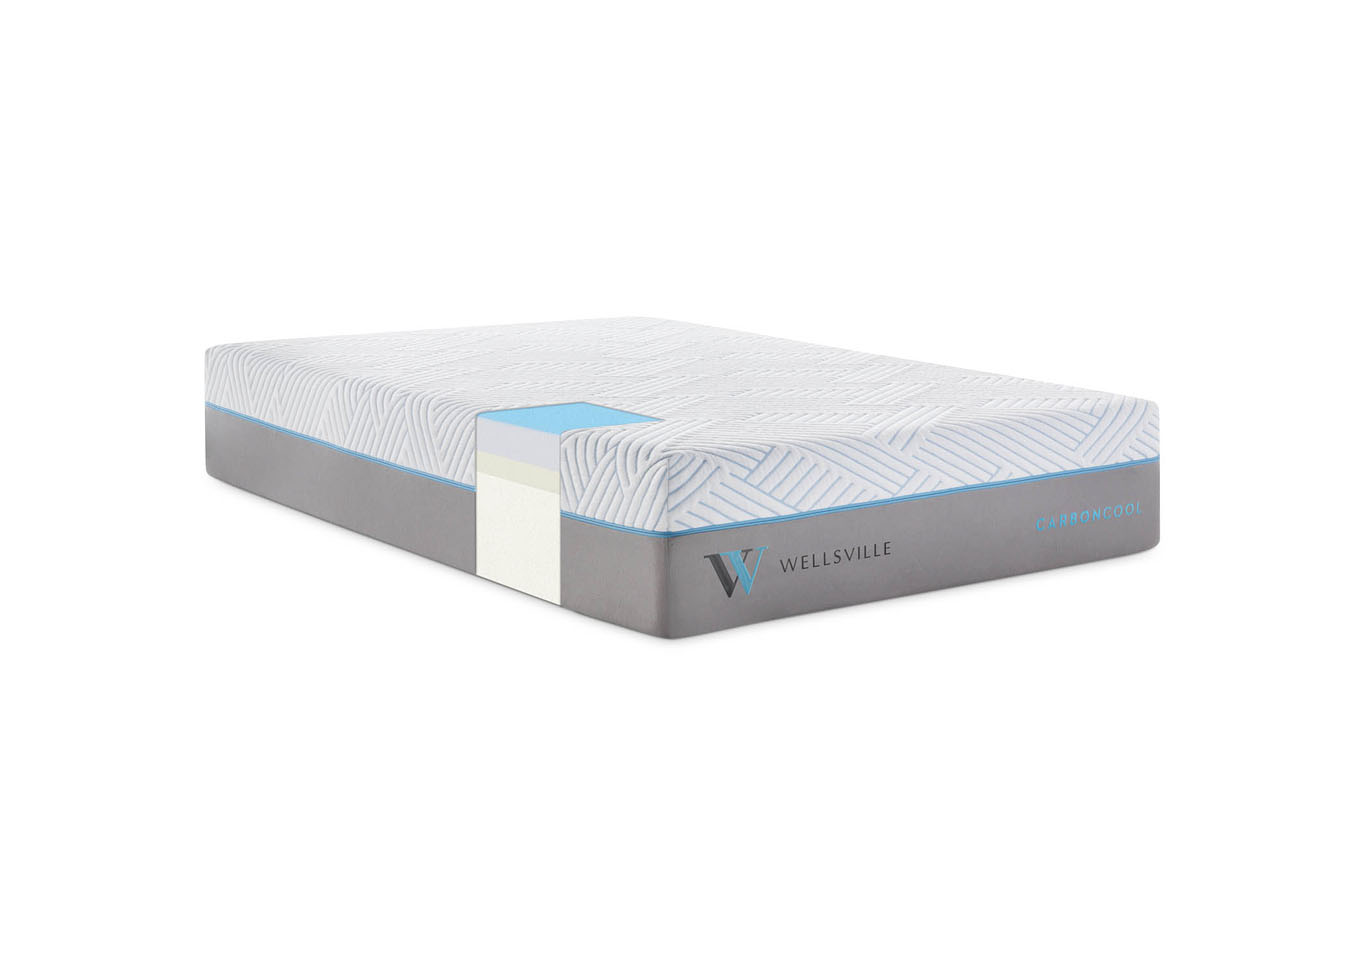 Wellsville 14 Inch CarbonCool Mattress Cal King,Malouf